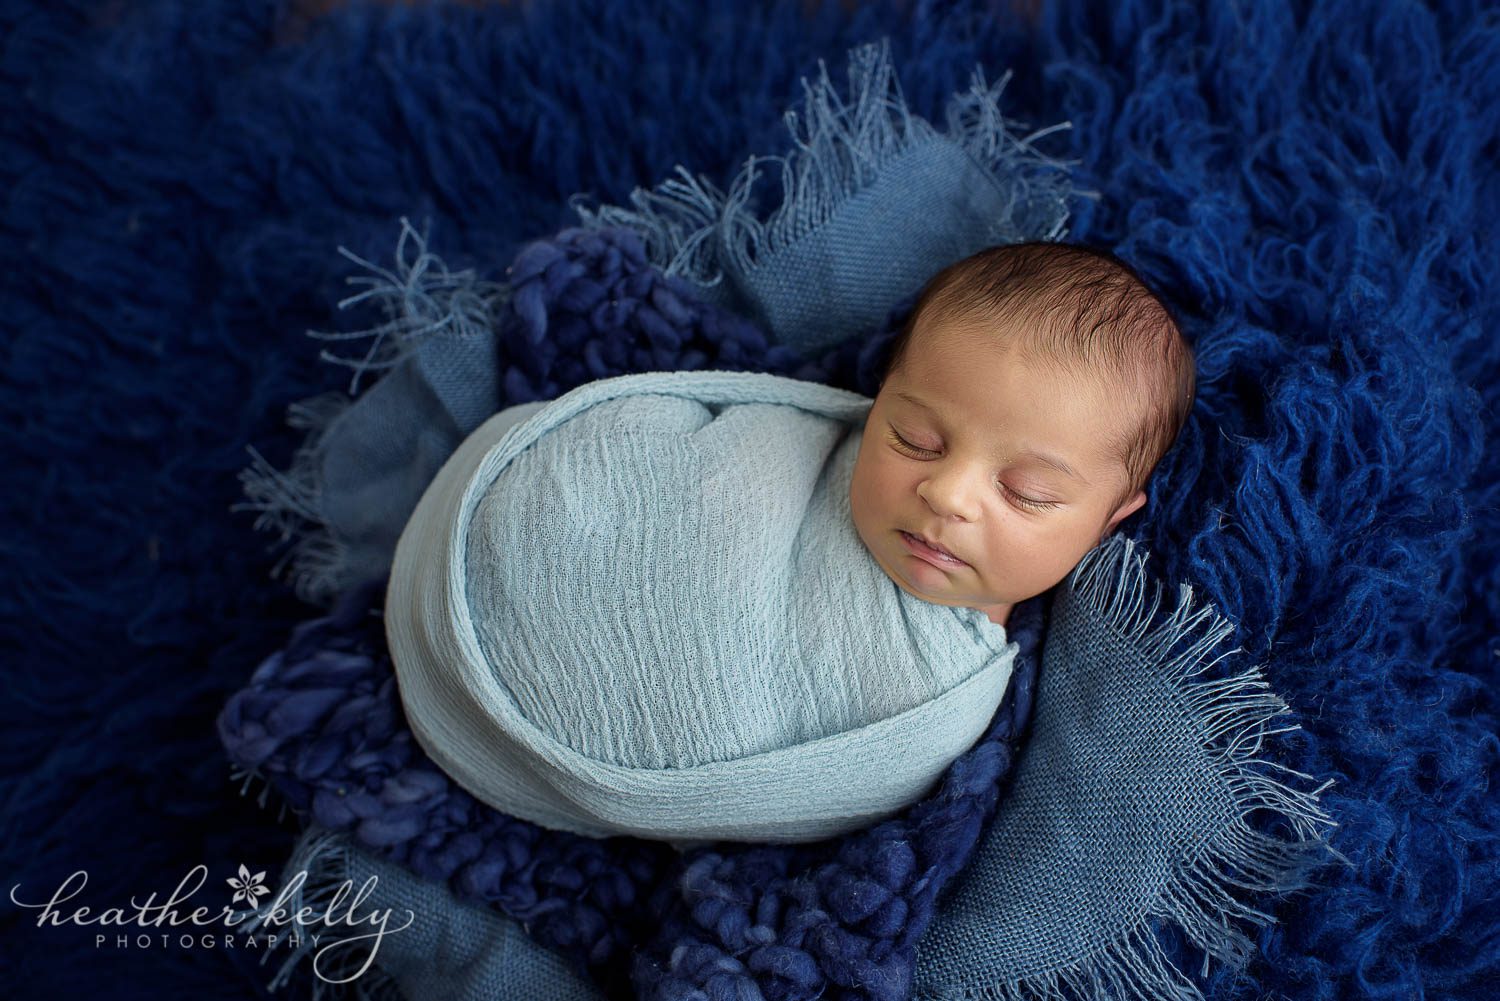 sleeping newborn wrapped in light blue. Newborn wrapping poses